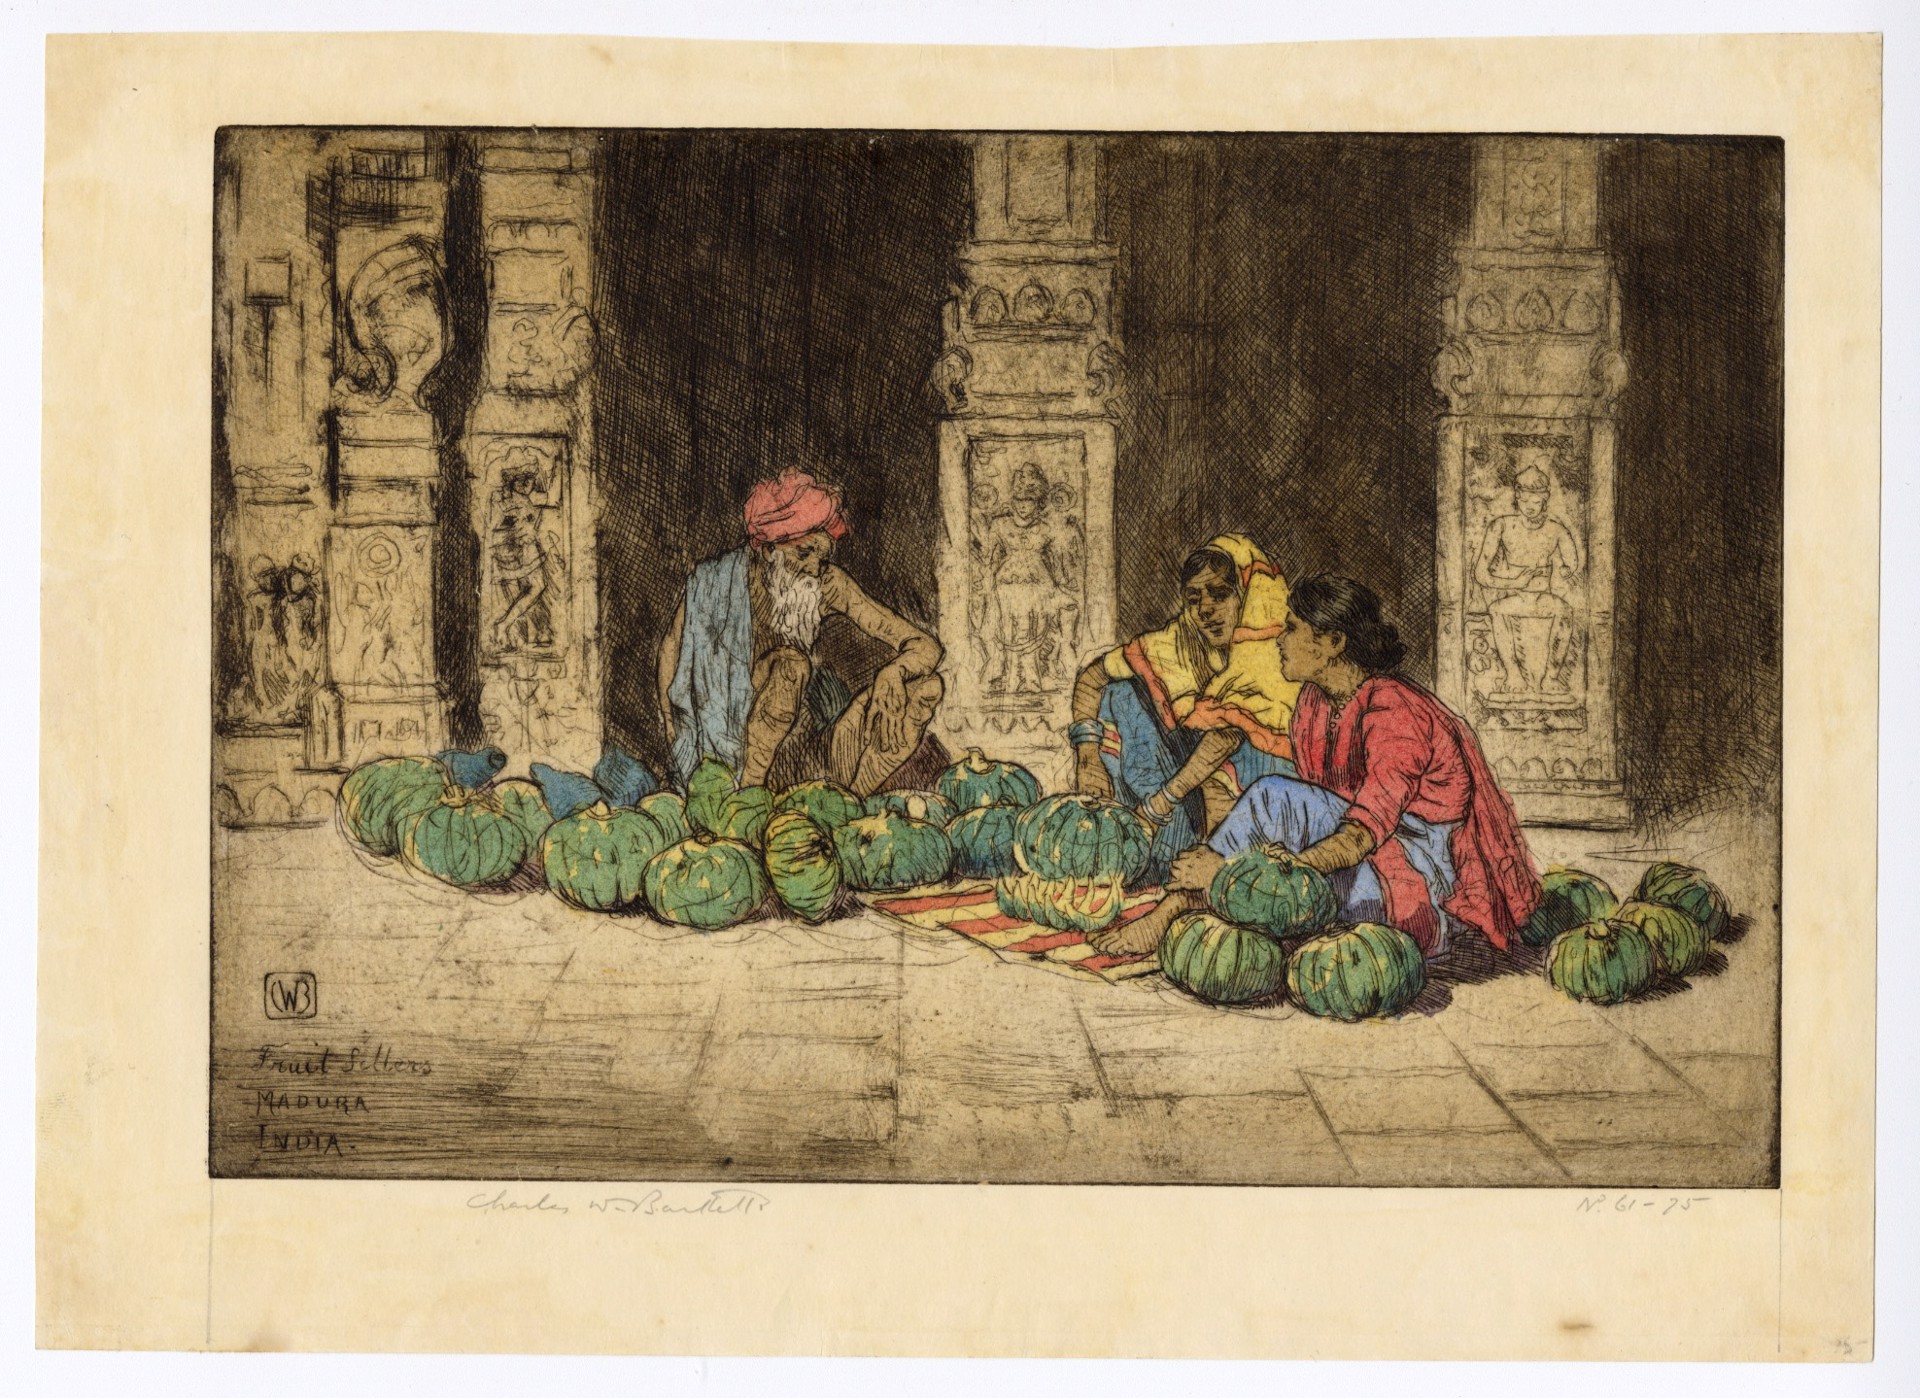 Fruit Sellers, Madura, India by Charles Bartlett